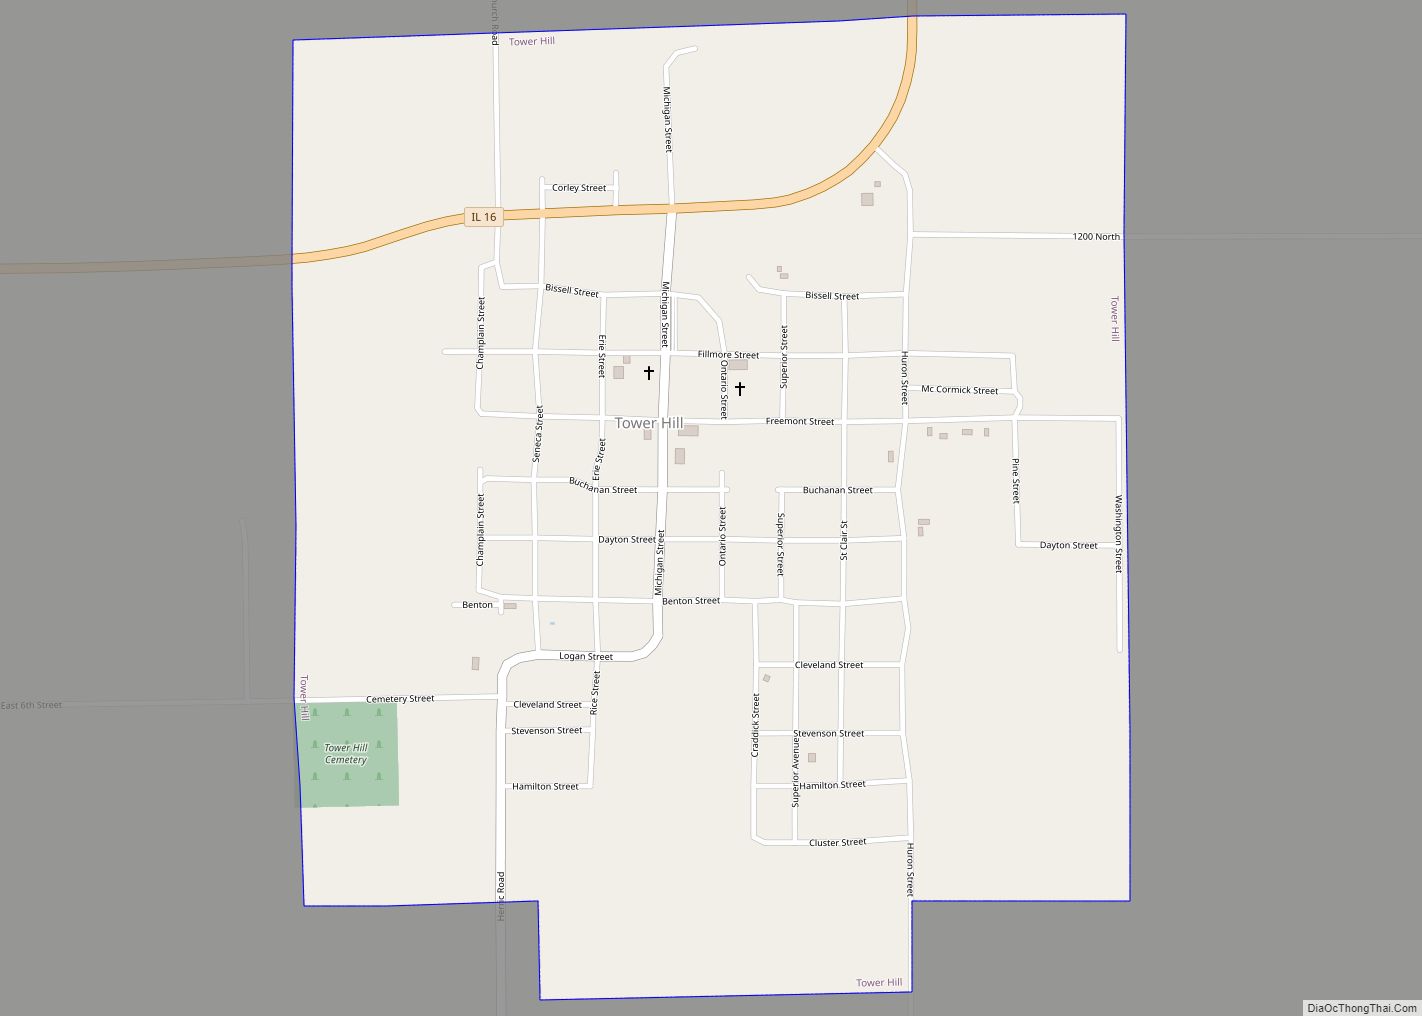 Map of Tower Hill village